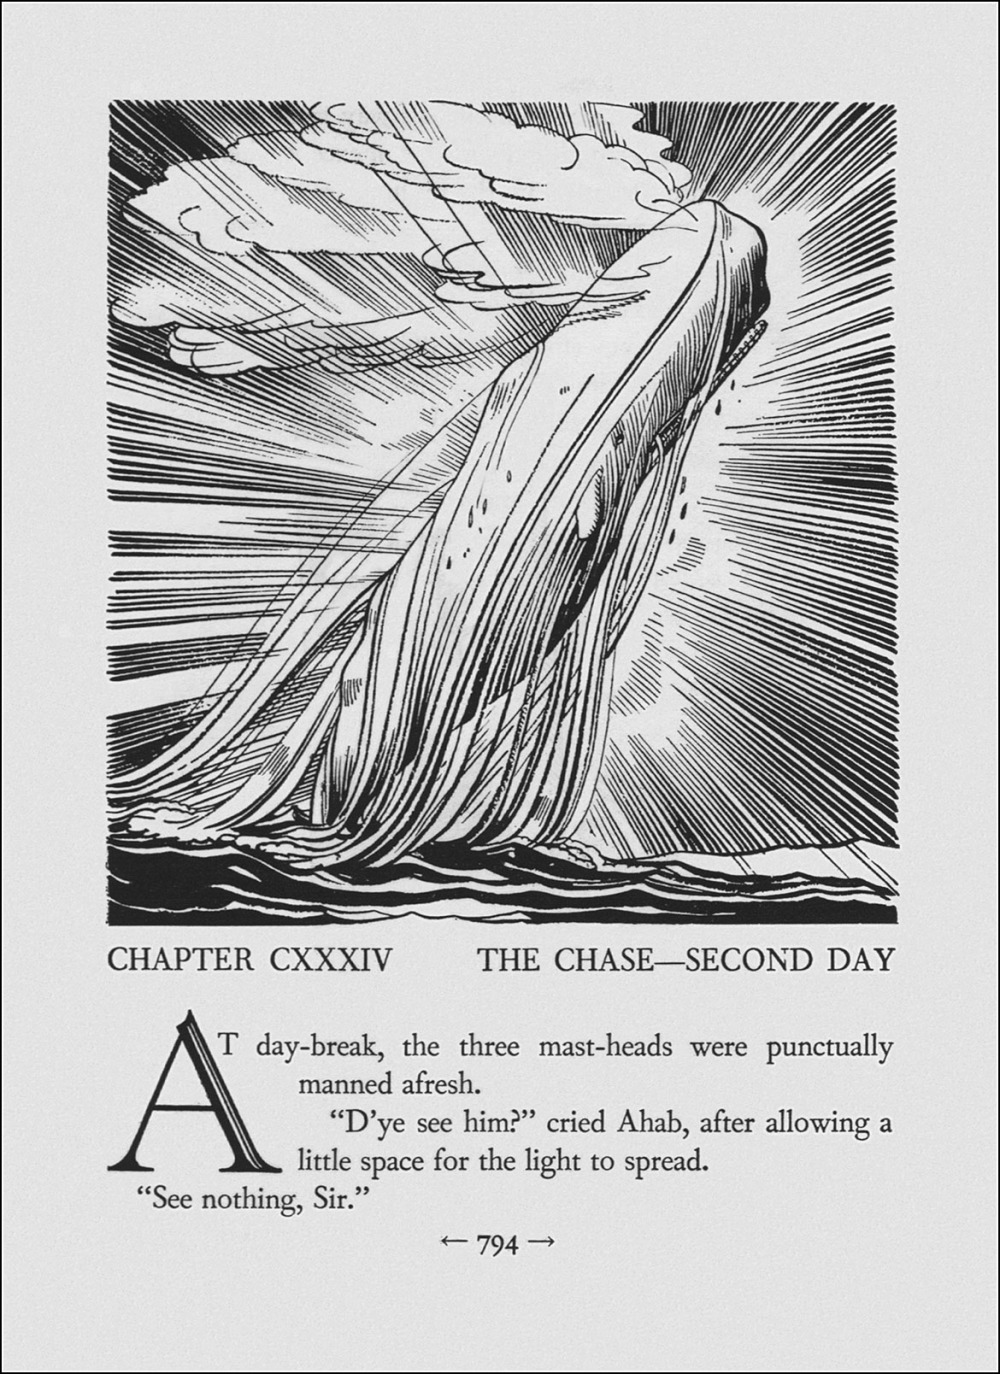 A whale breaching the ocean, illustration by Rockwell Kent